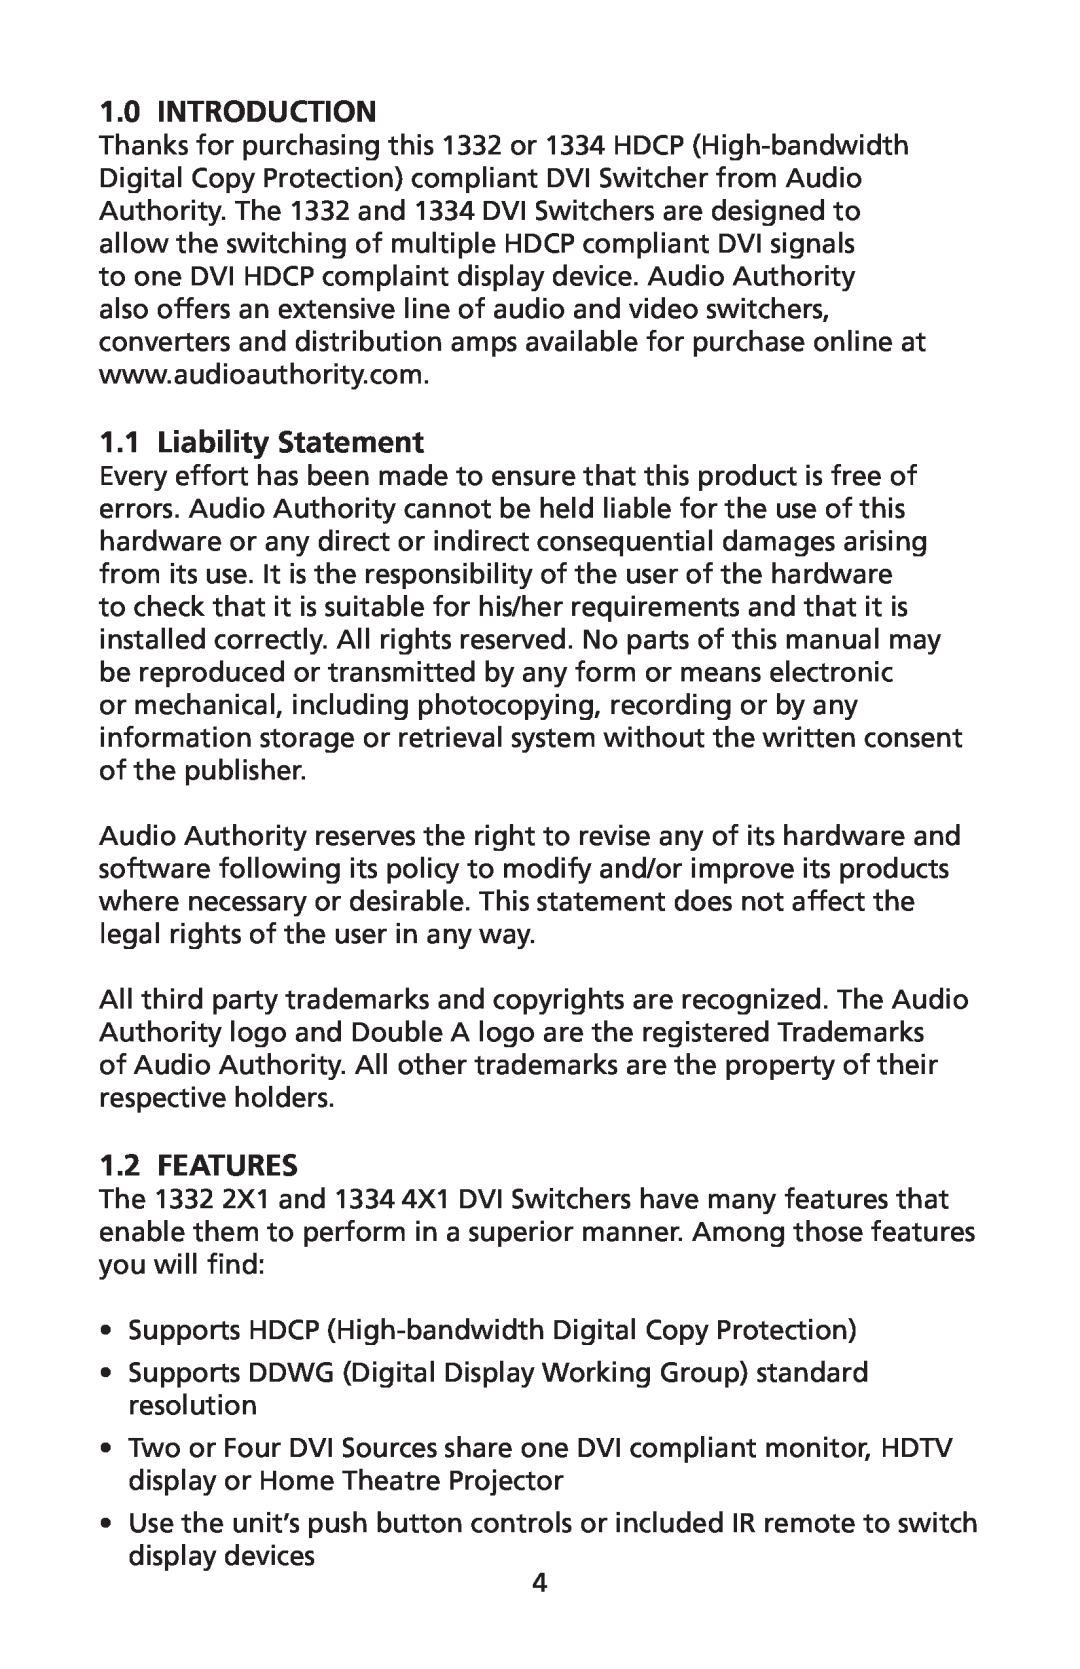 Audio Authority 1334, 1332 user manual Introduction, Liability Statement, Features 